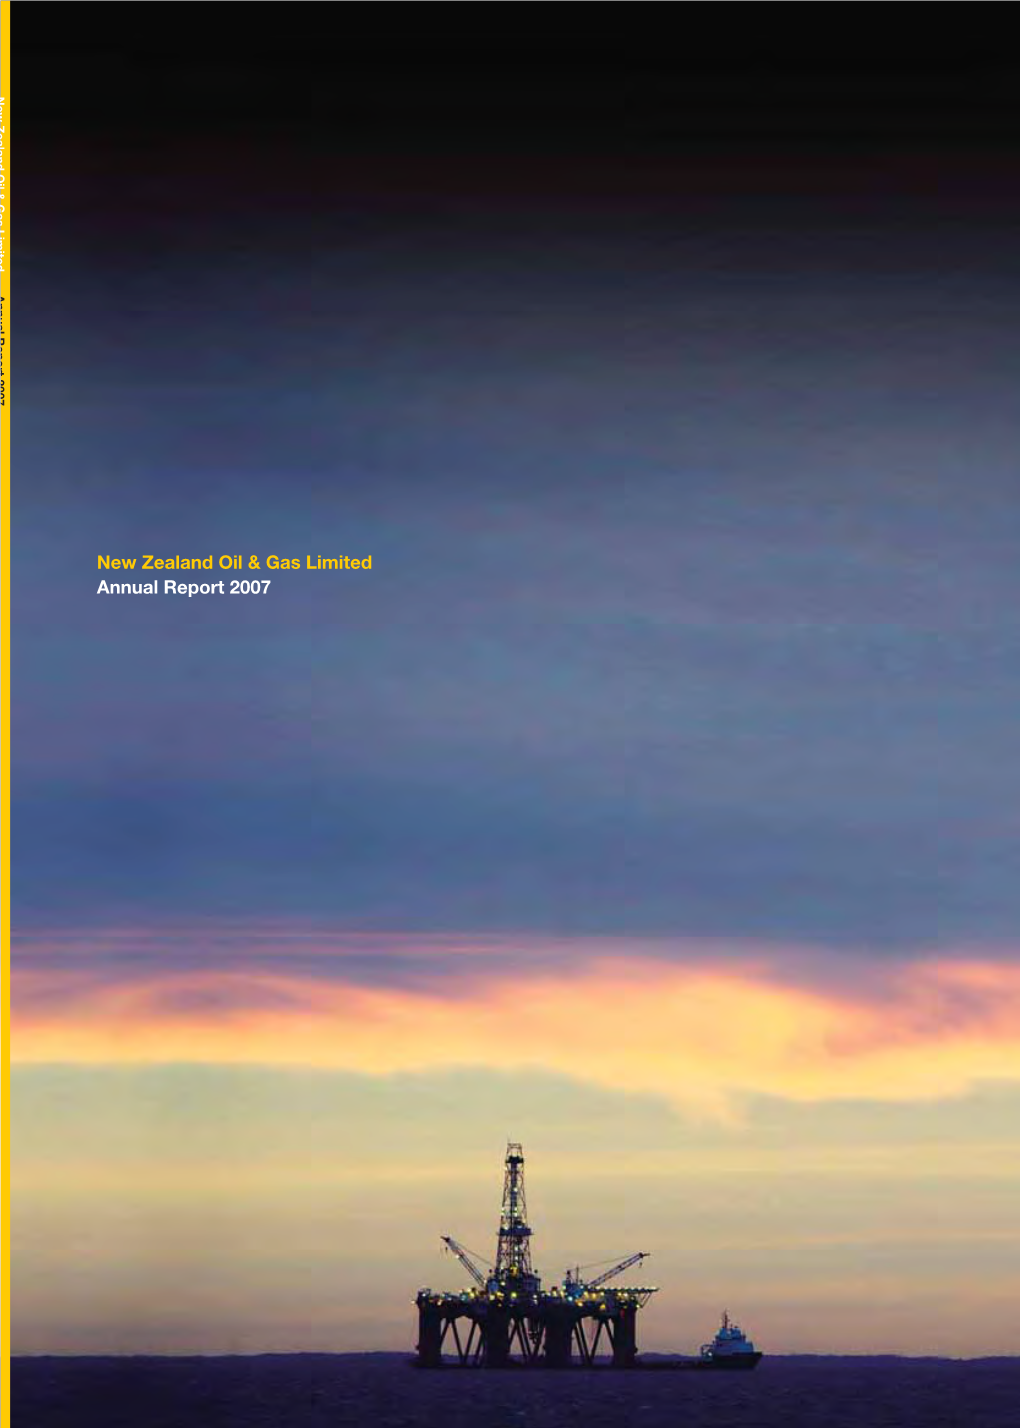 New Zealand Oil & Gas Limited Annual Report 2007